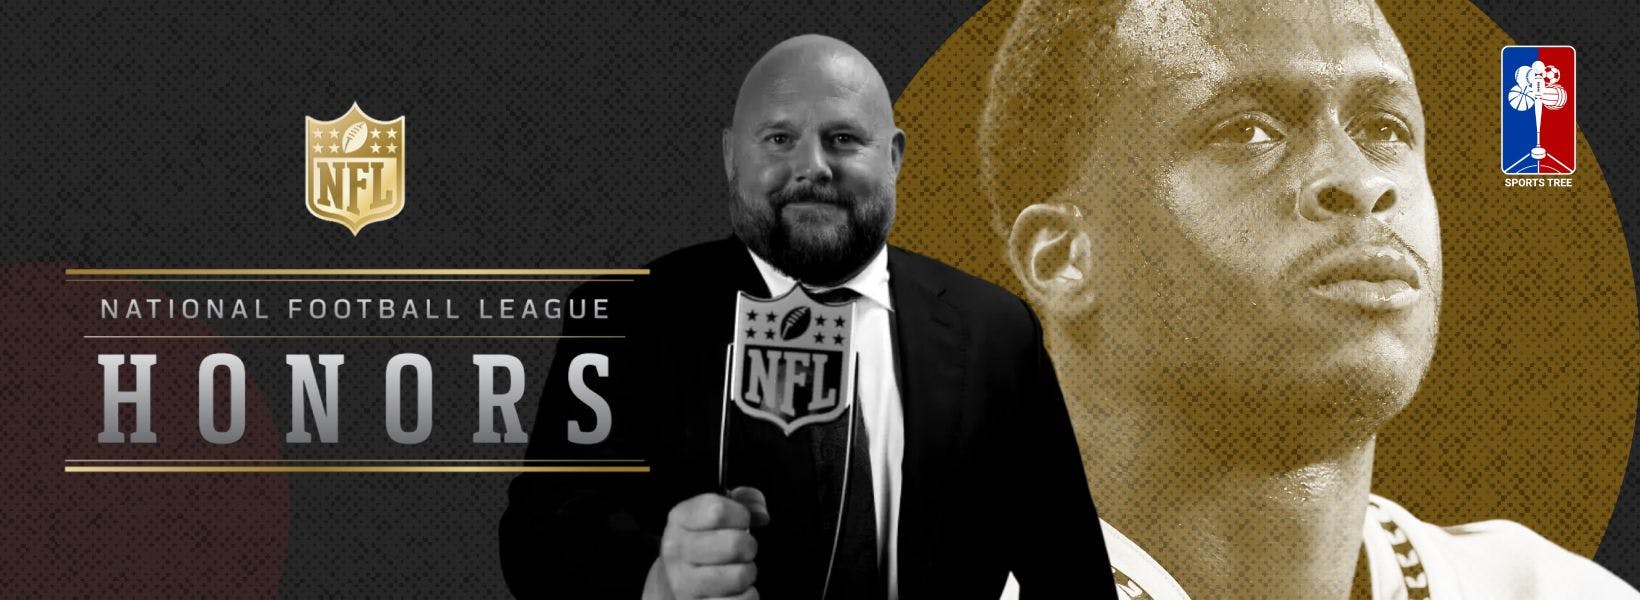 NFL Honors- A look at all the 2022 award winners; Brian Daboll and Geno Smith